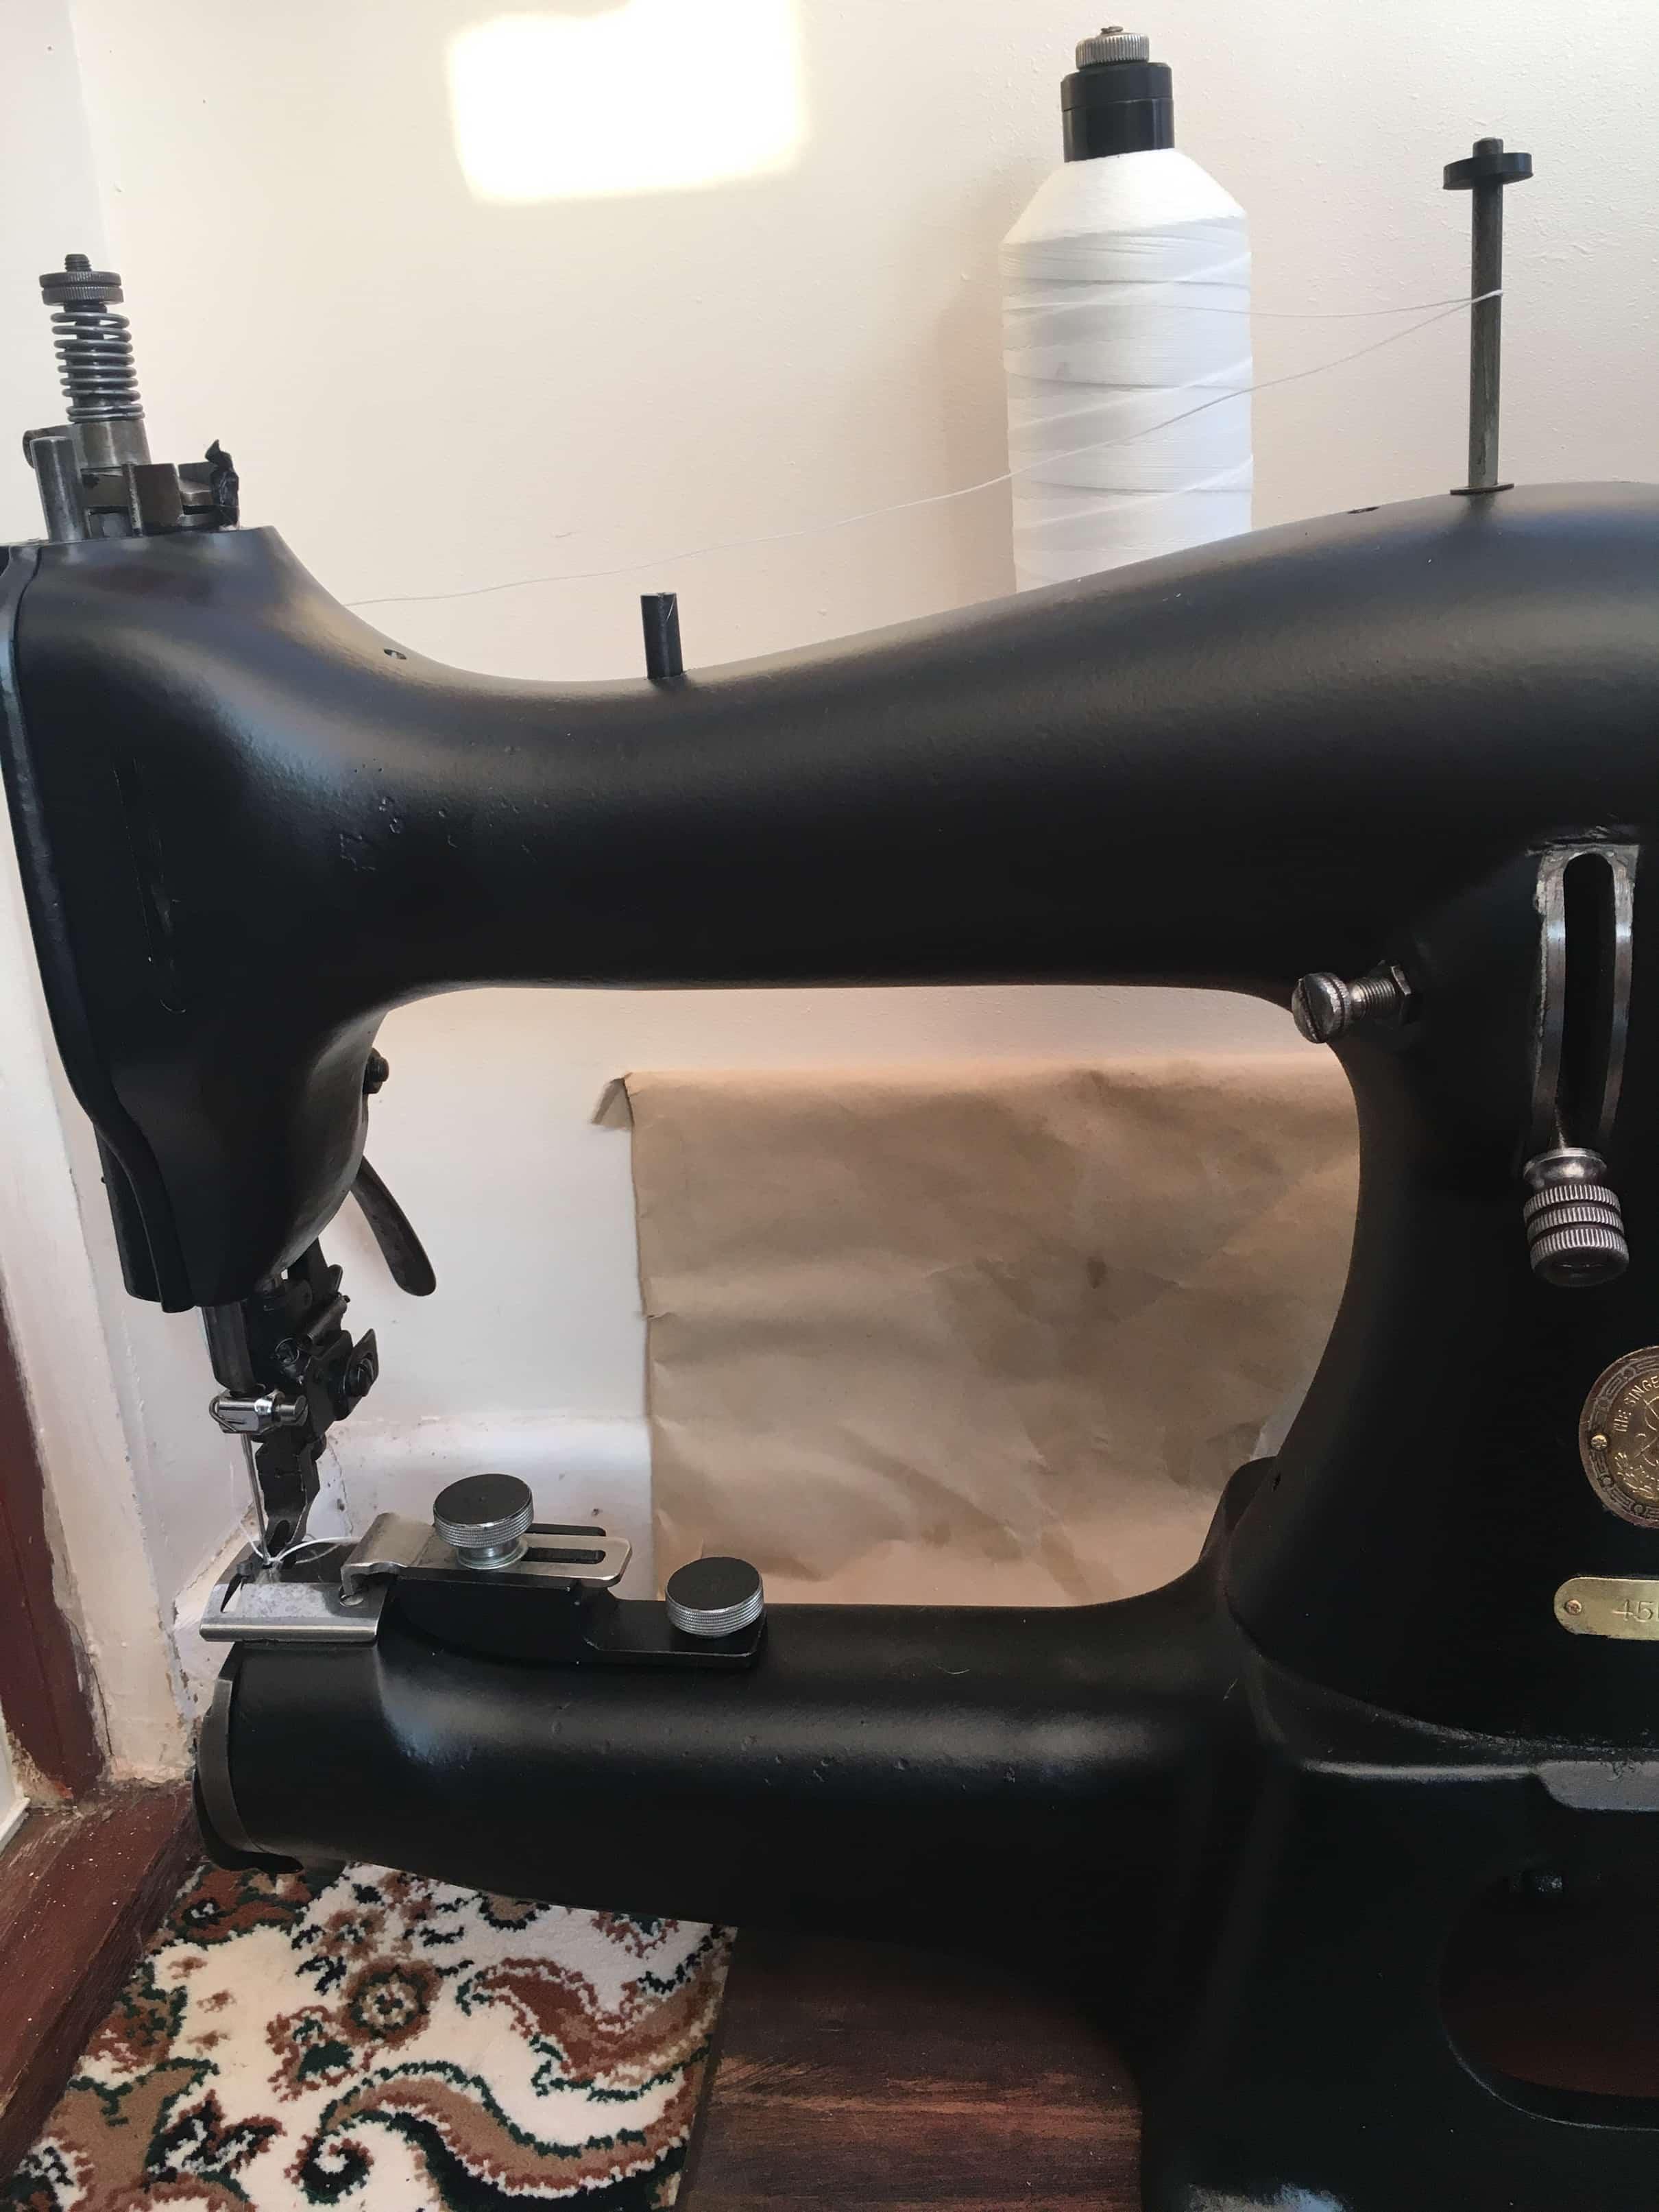 Weaver 205 Sewing Machine, Complete with Stand and Servo Motor